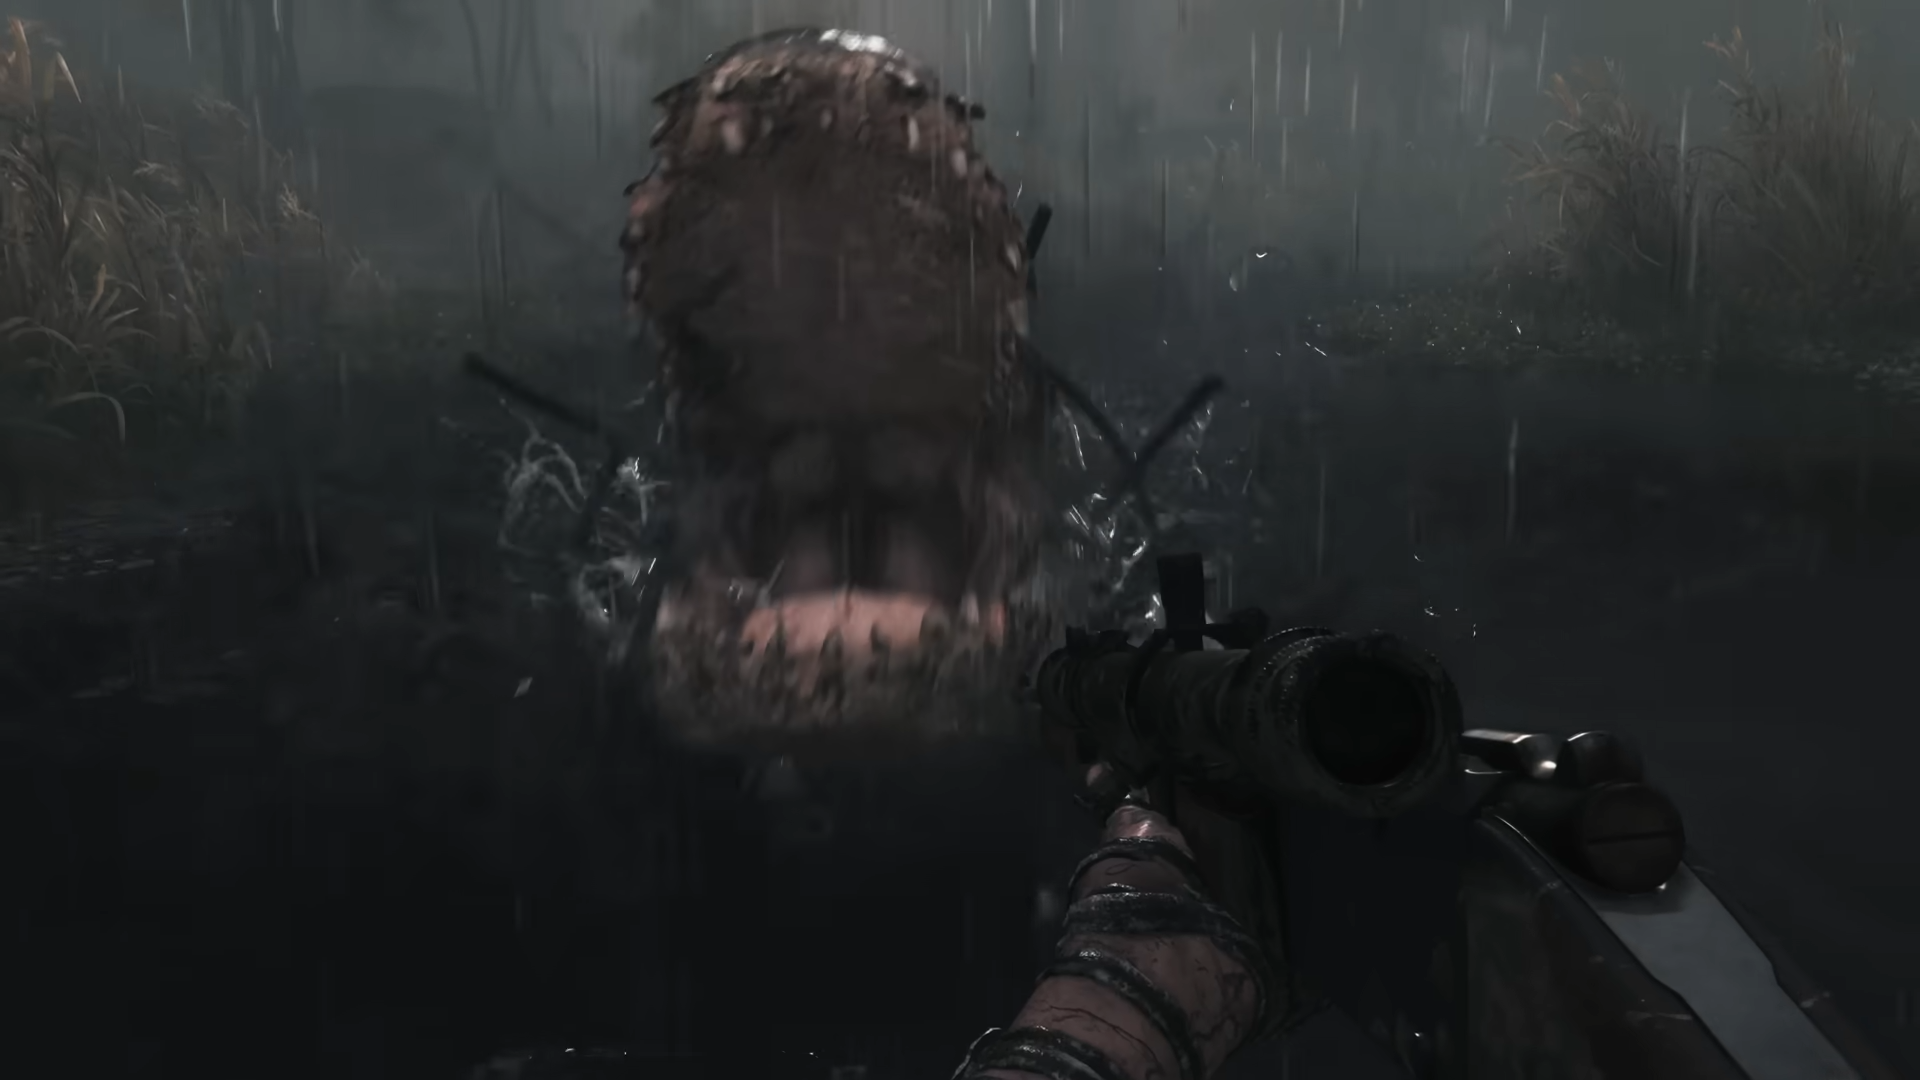 The mouth of alligator boss Rotjaw emerges from the water to devour an unsuspecting player in Hunt: Showdown